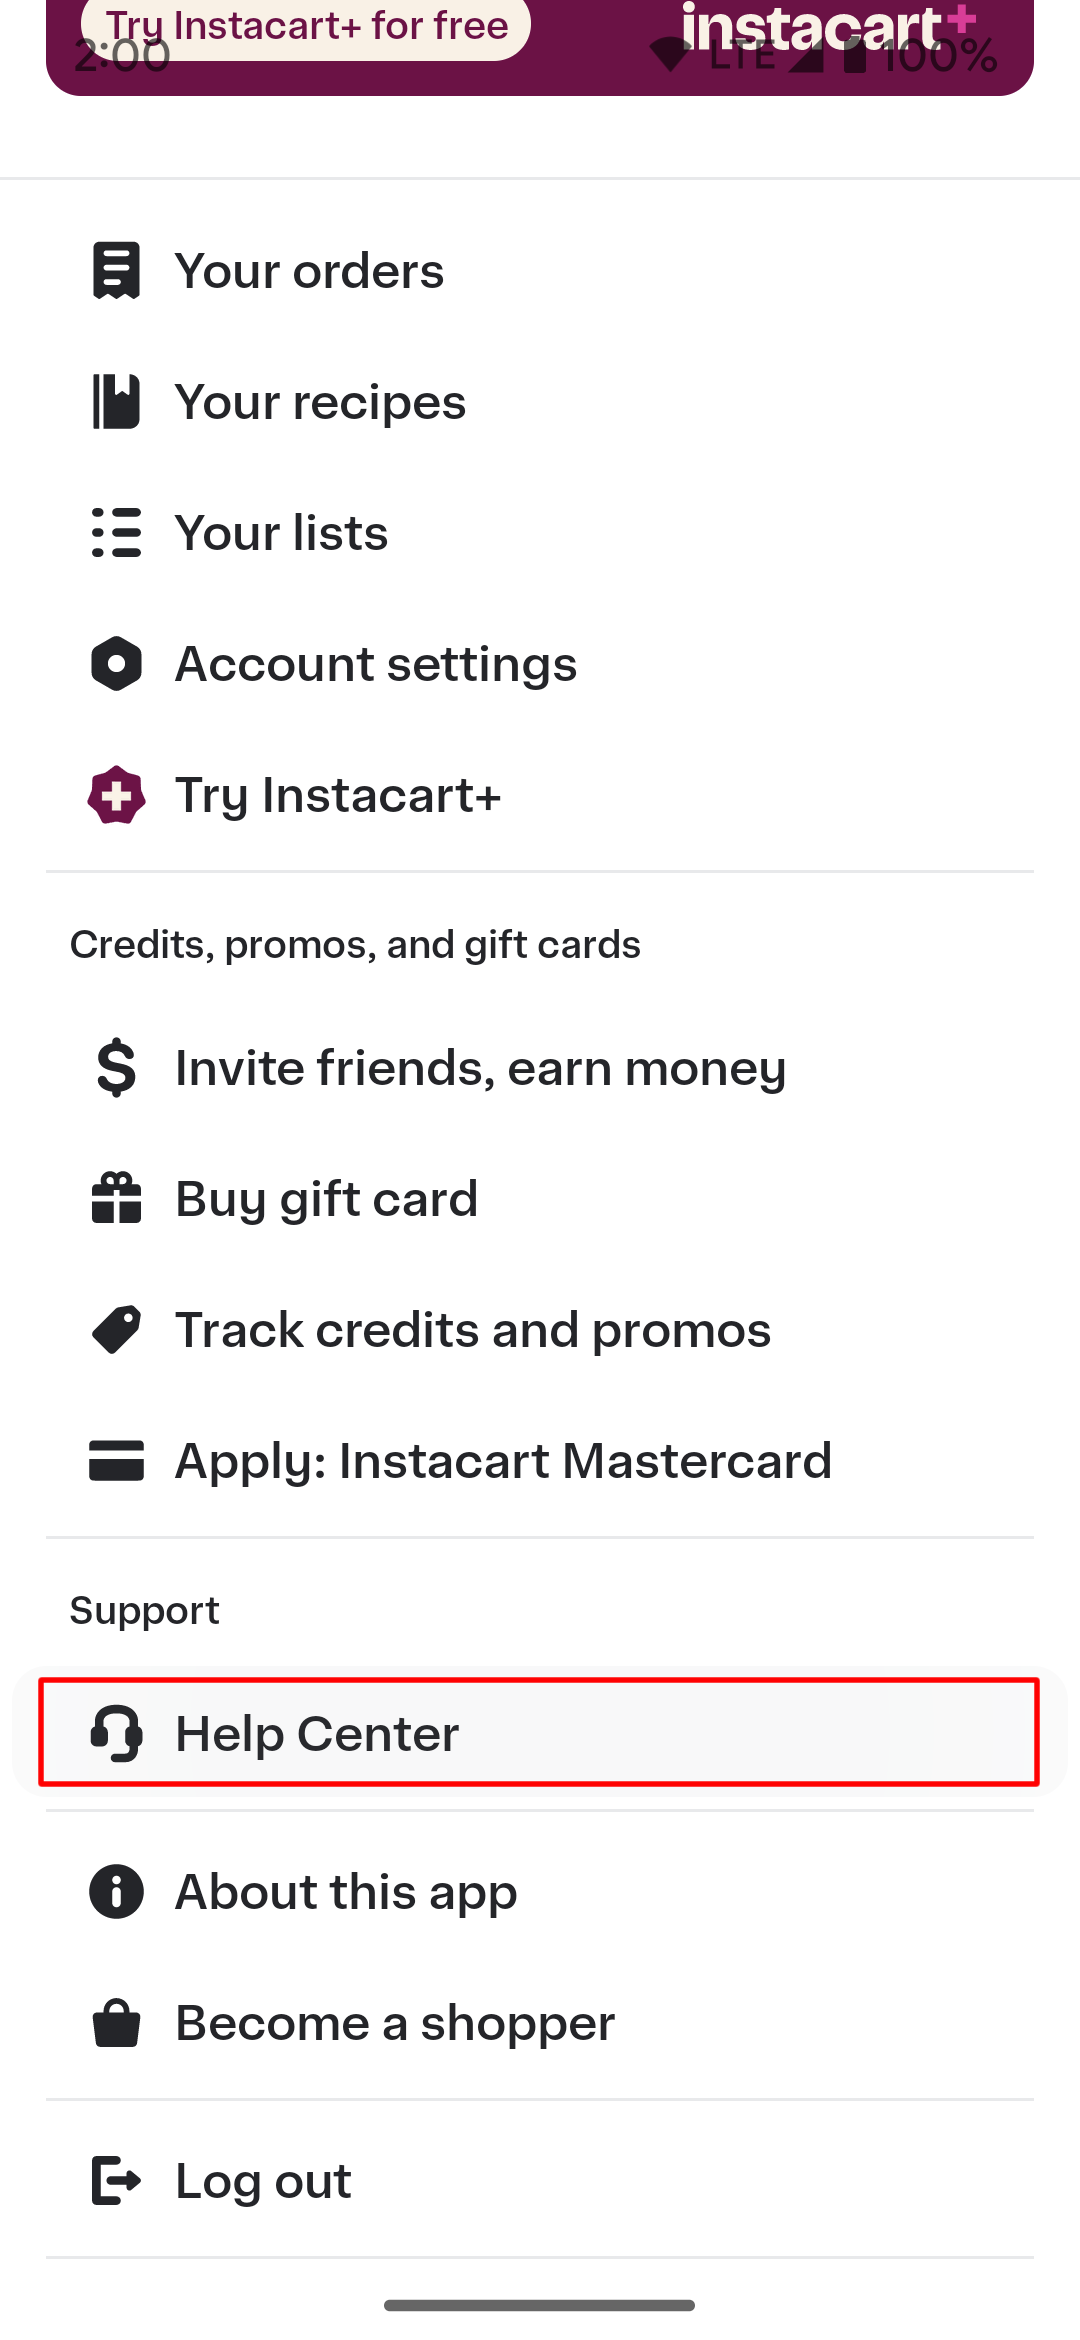 Selecting the Help Center section in the Instacart app.